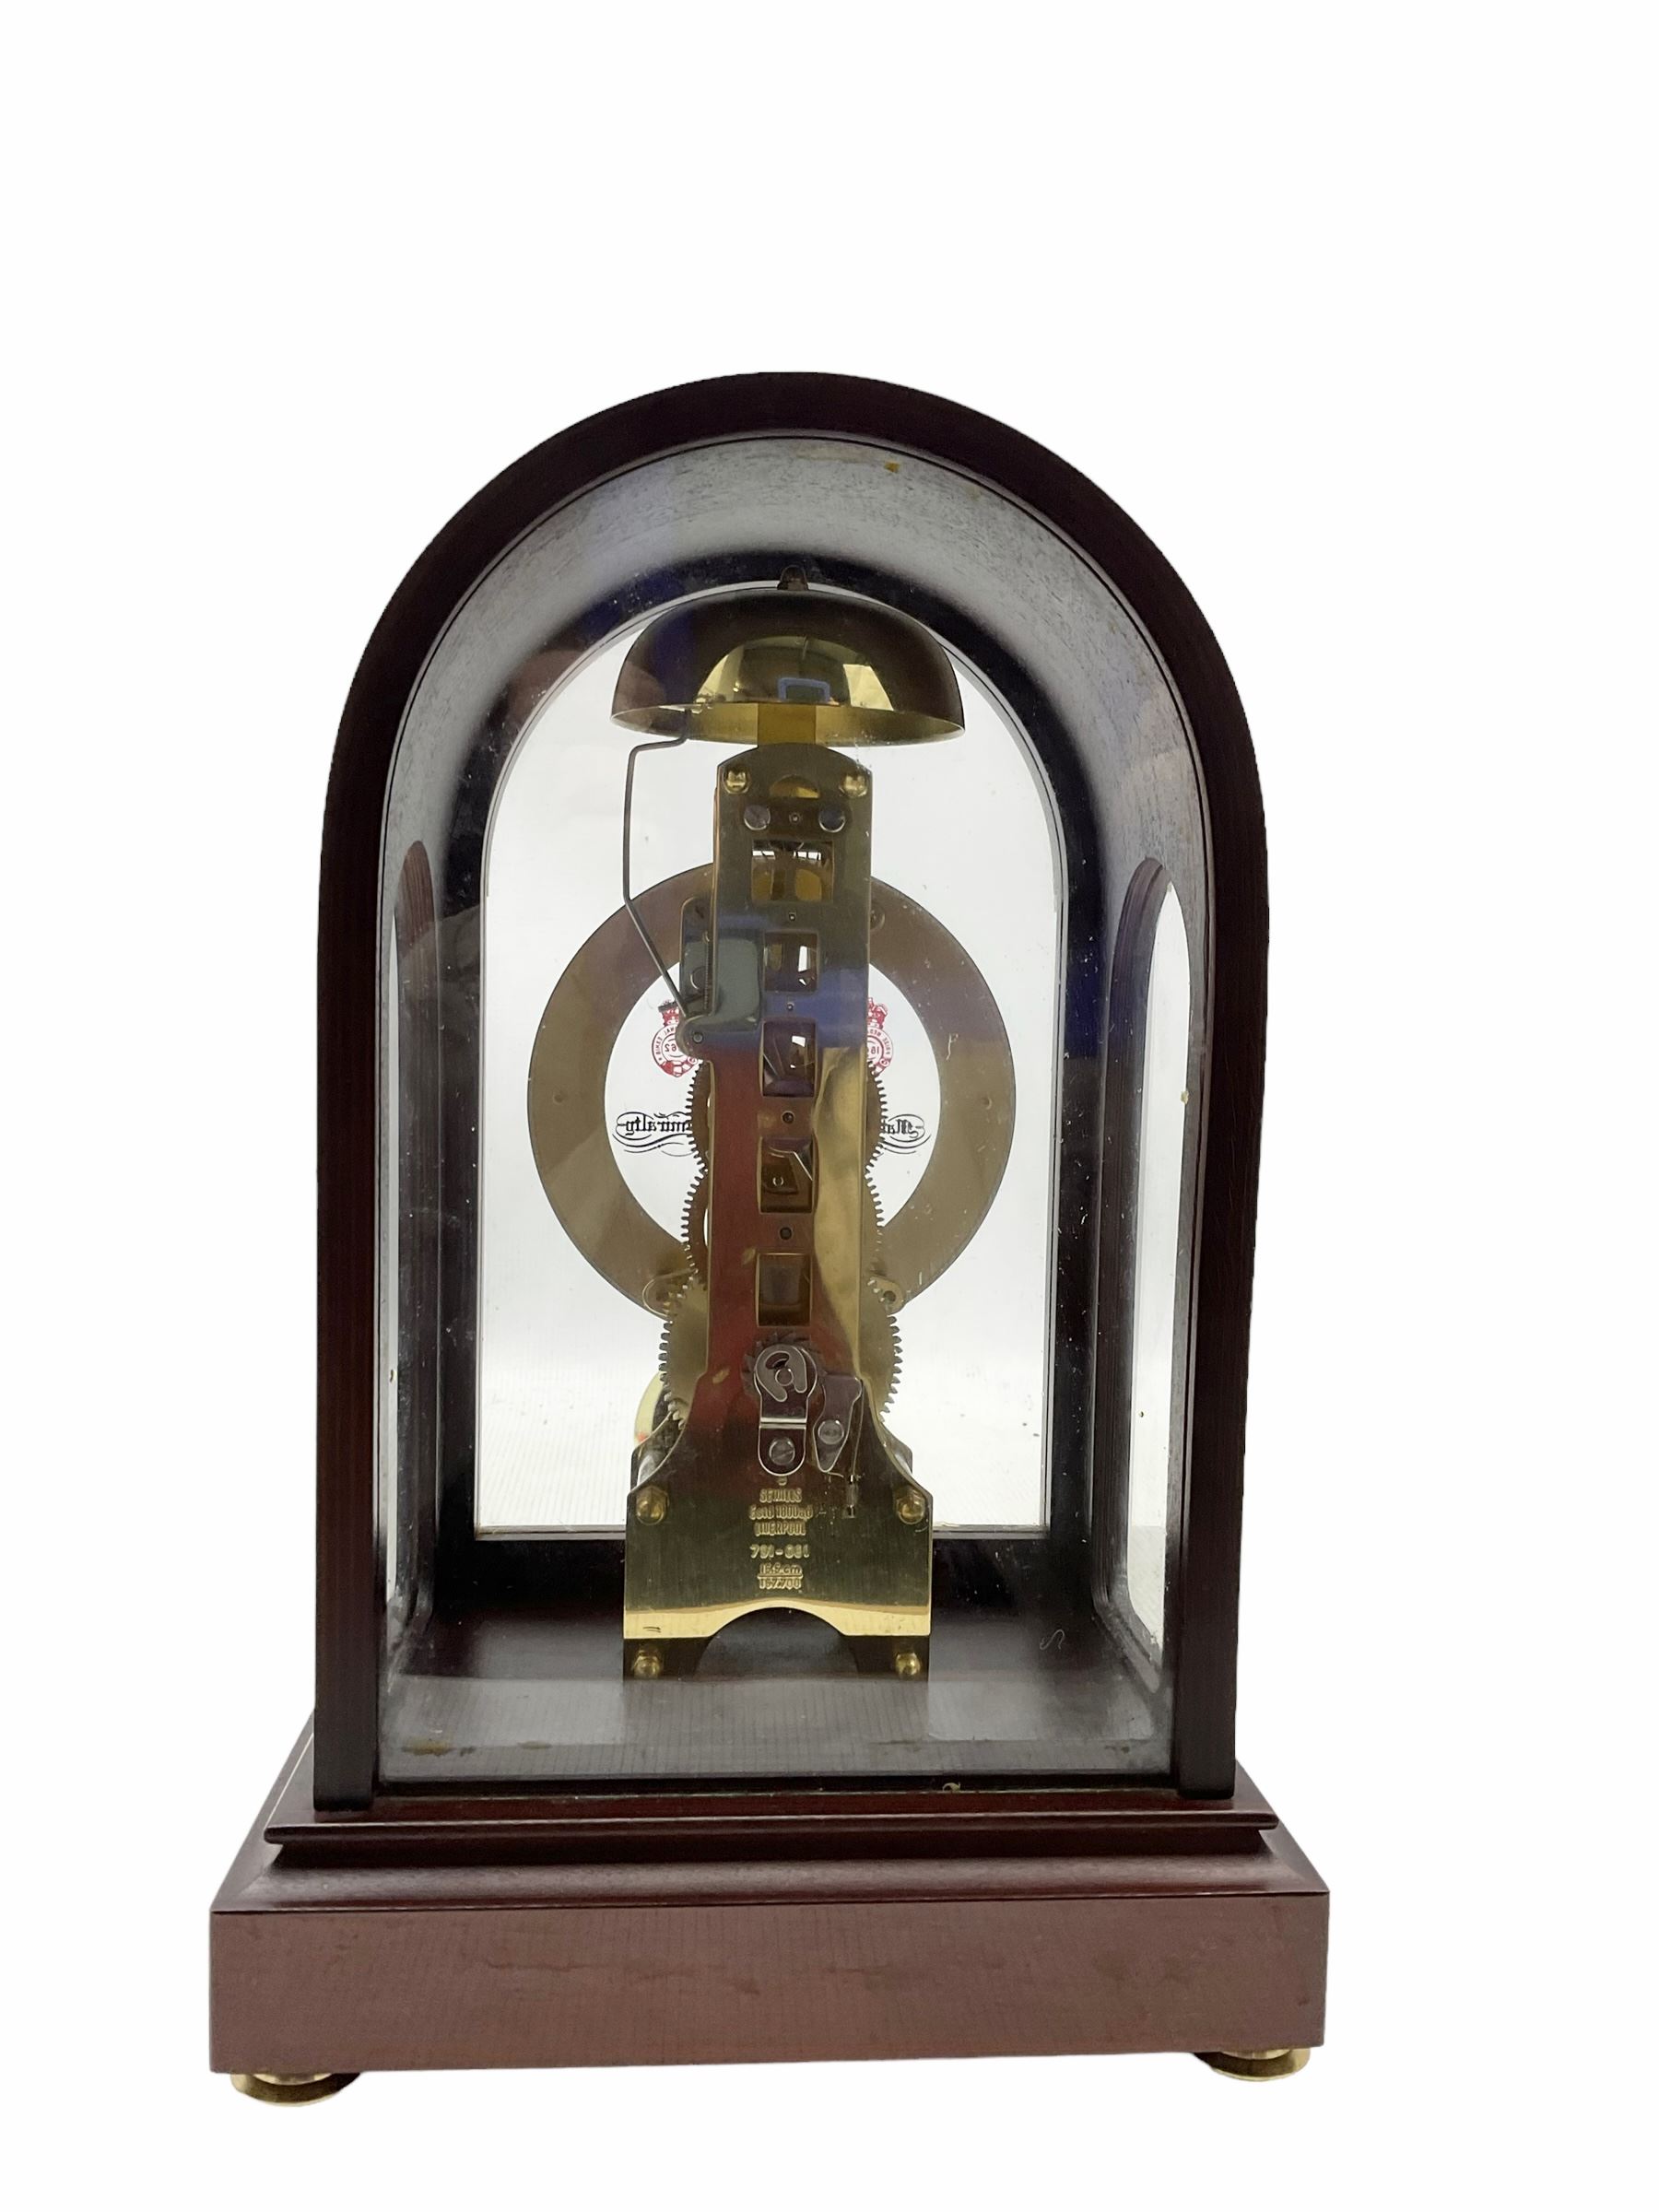 Sewells of Liverpool - 20th century 8-day skeleton clock in a four glass mahogany case - Image 3 of 4